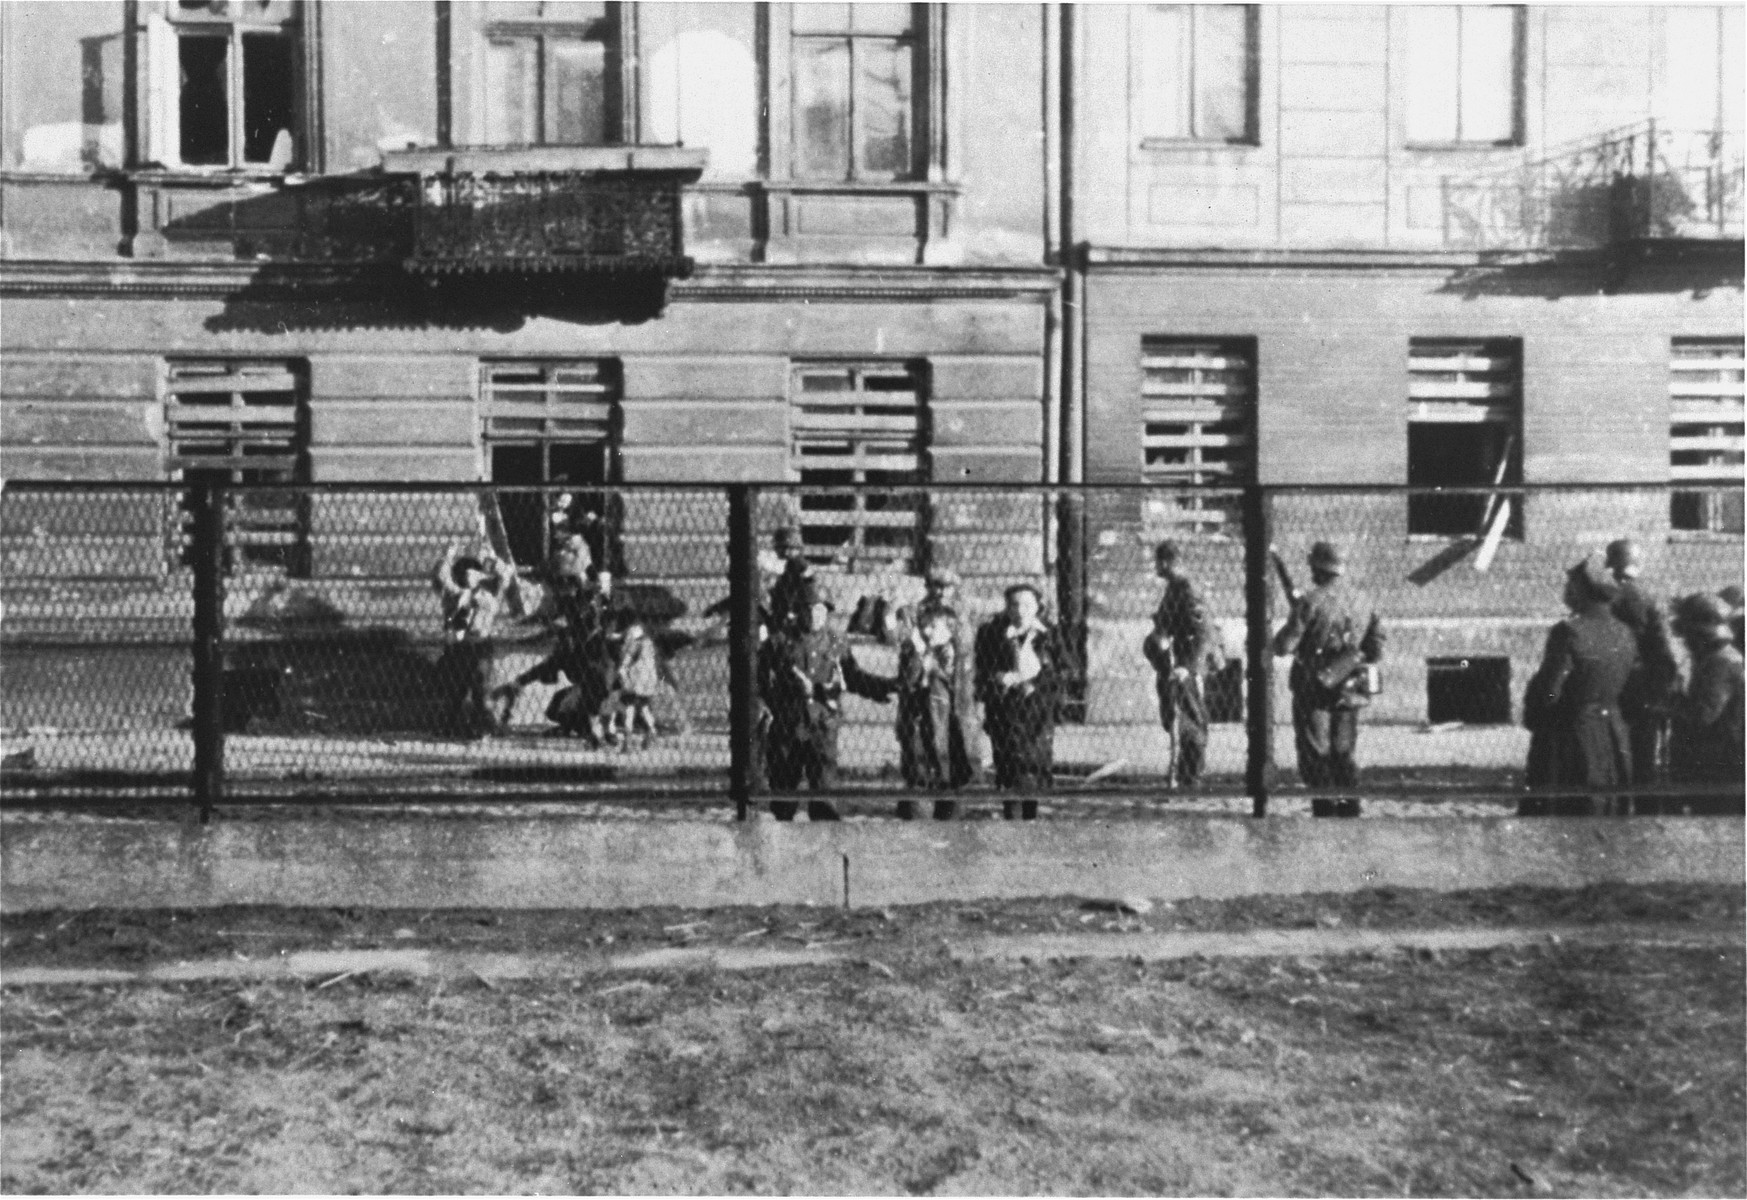 SS troops force Jewish families to evacuate an apartment building during the suppression of the Warsaw ghetto uprising.